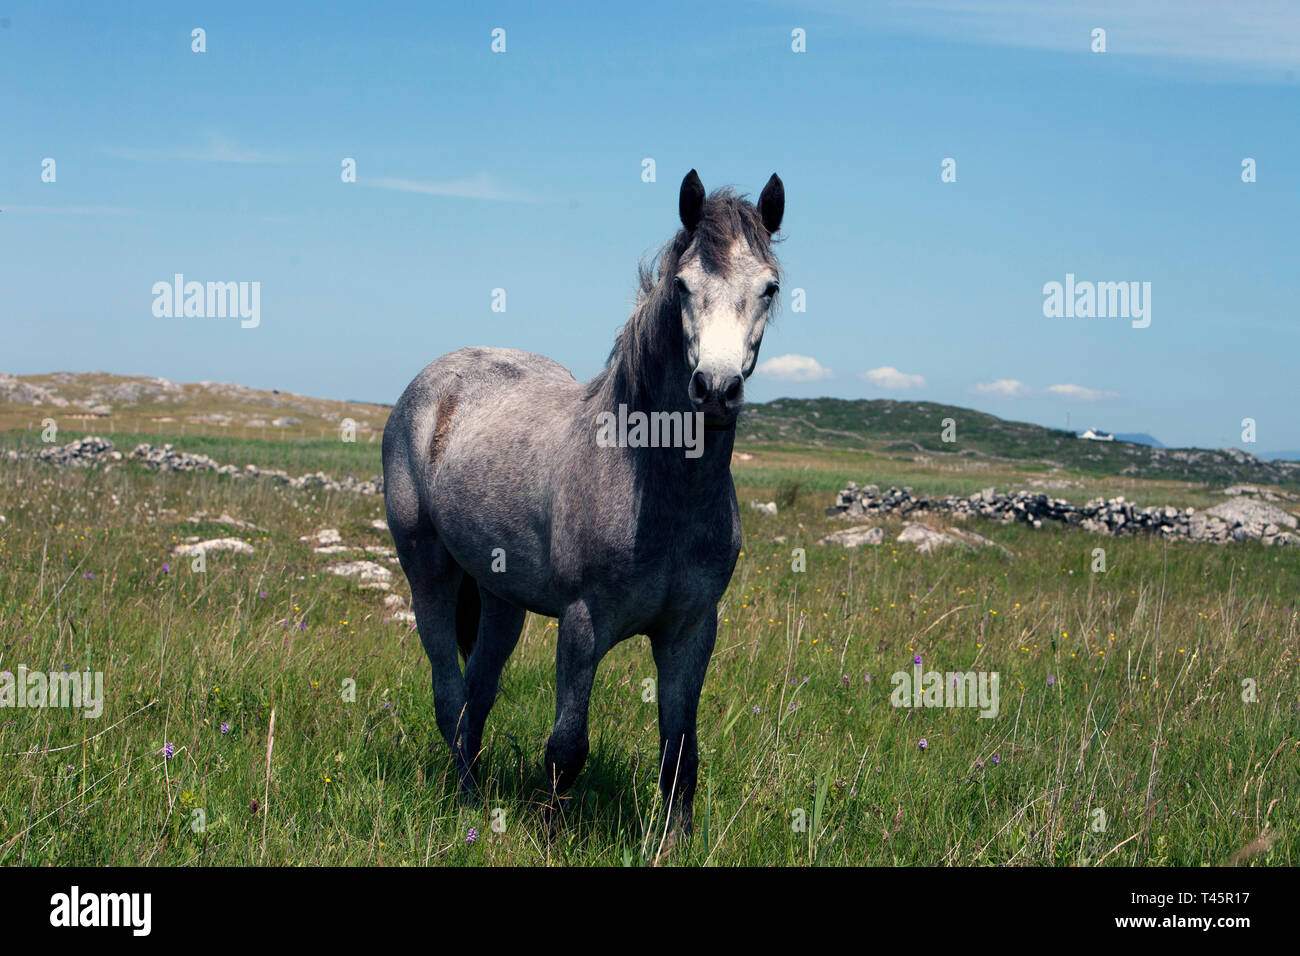 Connemara Pony breed in Irish landscape. A docile, friendly horse the Connemara Pony is sought after worldwide. Stock Photo